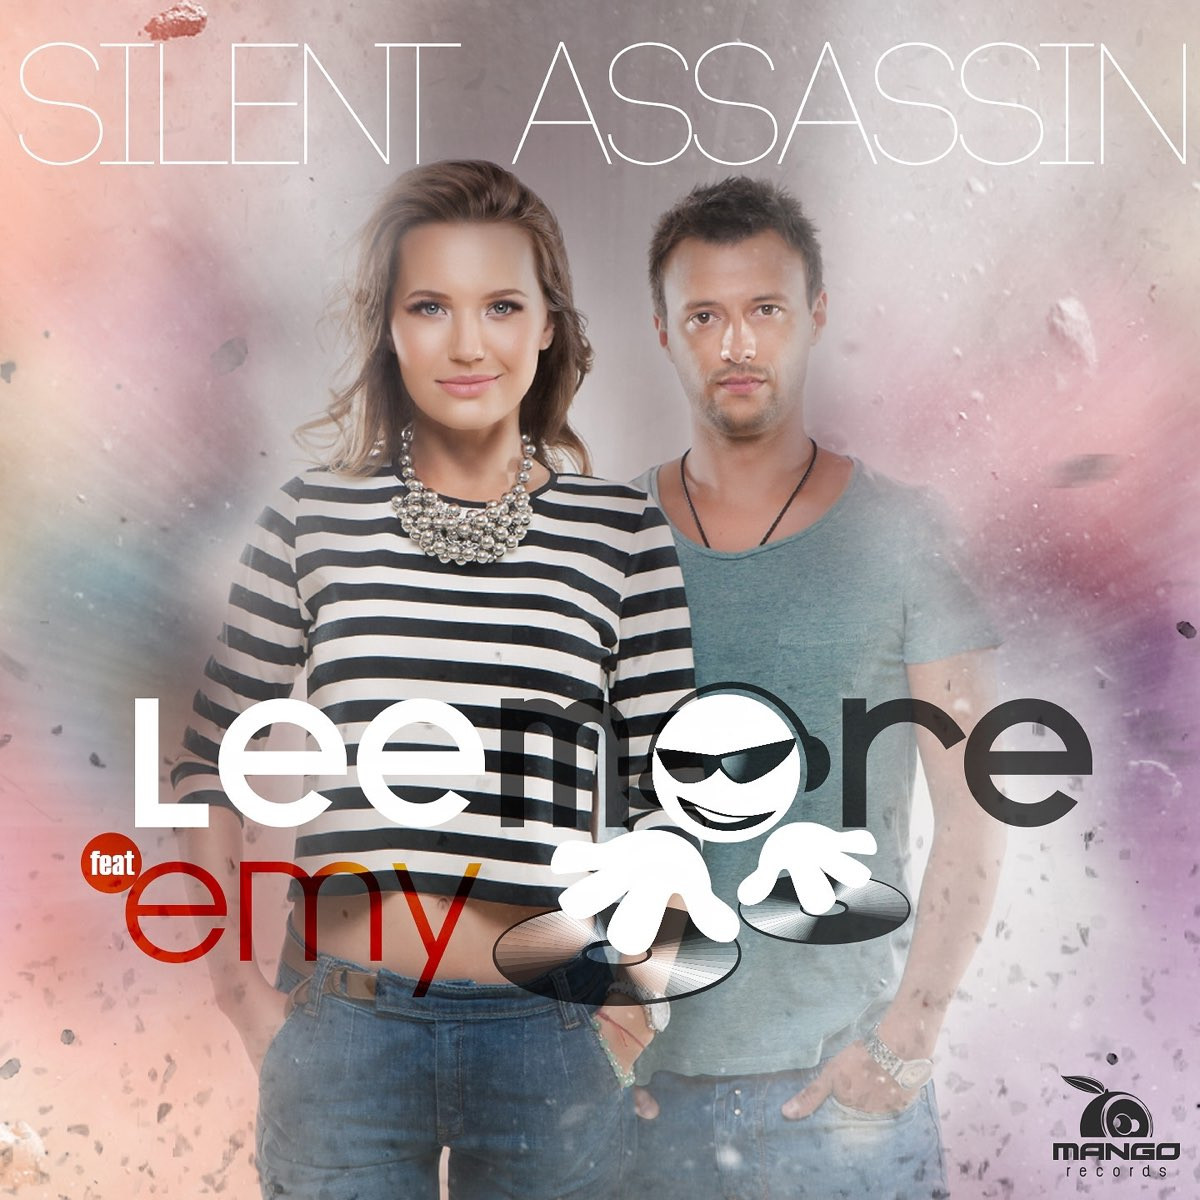 Lee More feat. Emy - Silent Assassin (2014)